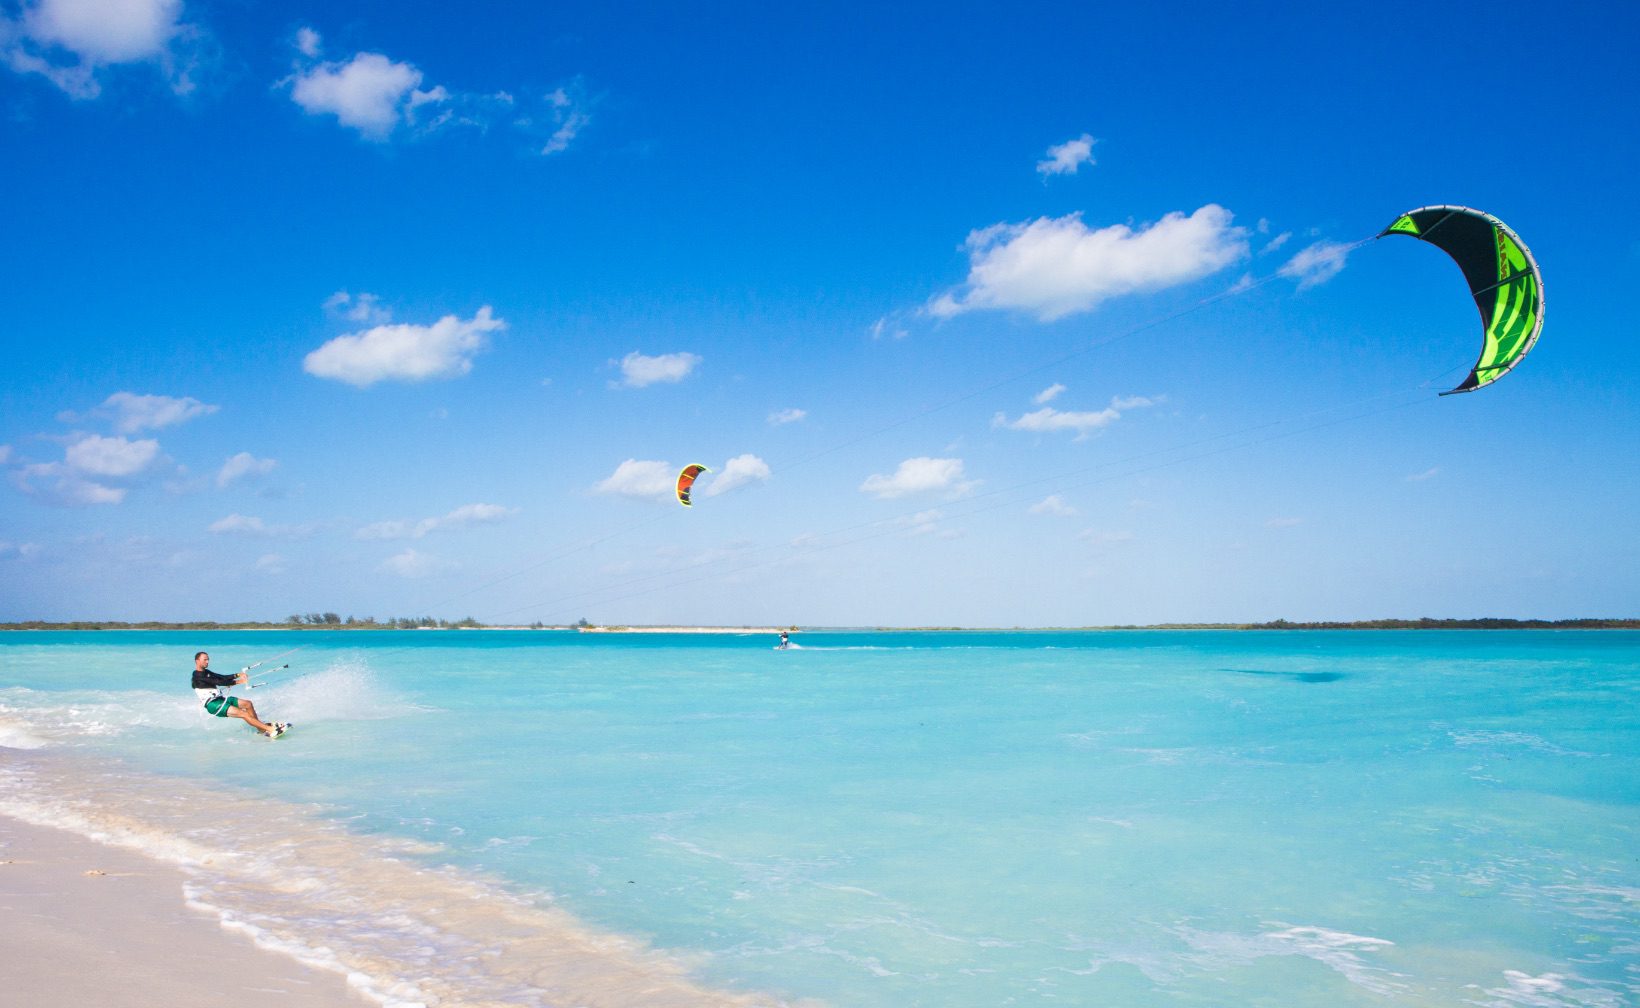 Find your adventure in Cooper Jack Bay. Reserve your own kiteboard for free from The Strand Beach Club.